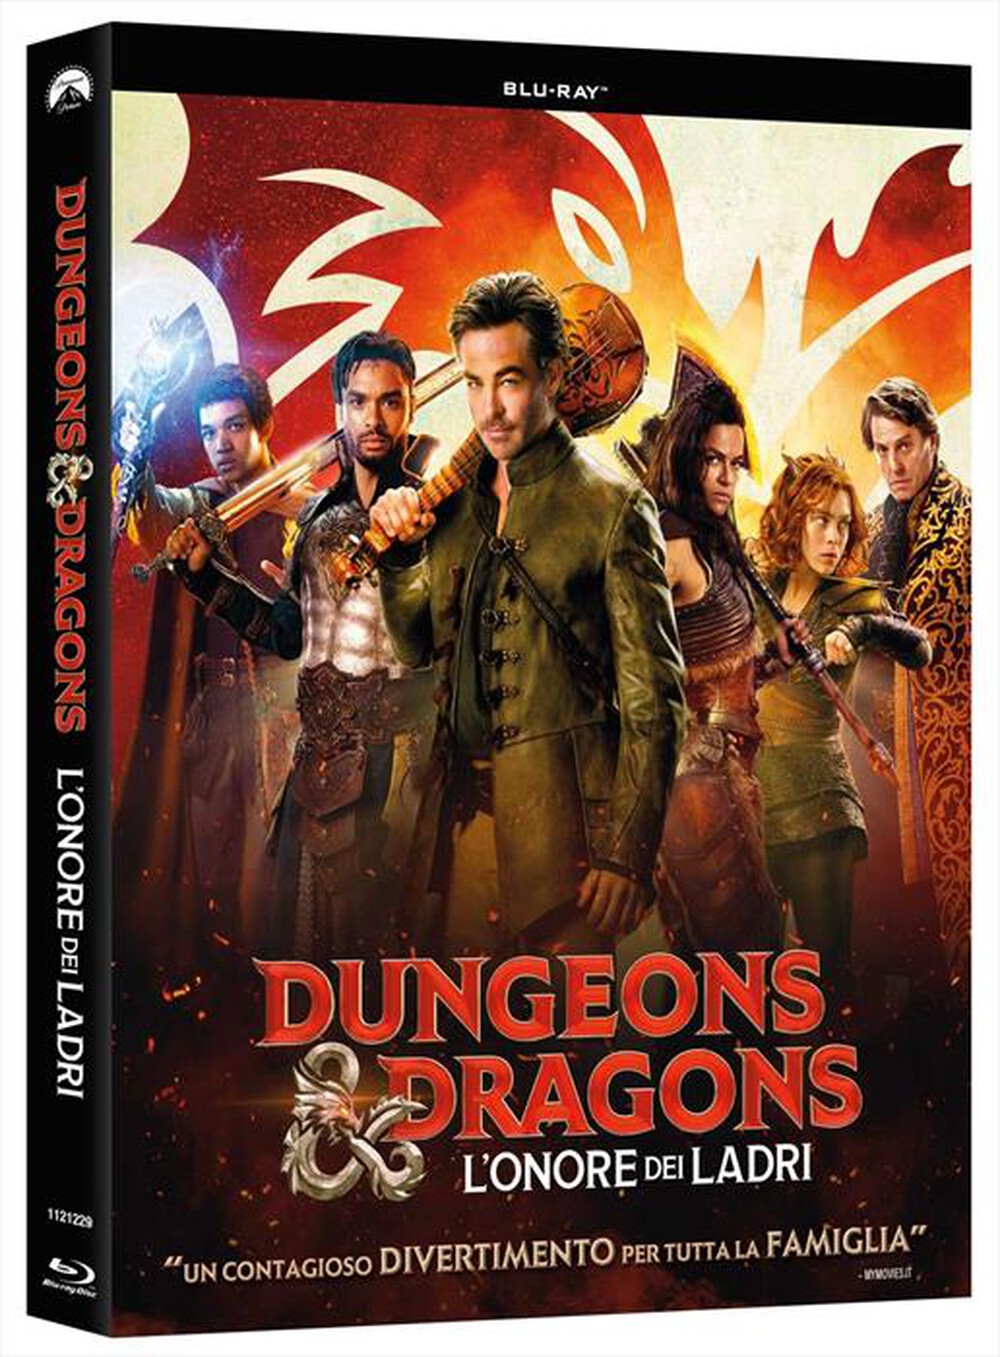 "PARAMOUNT PICTURE - Dungeons & Dragons - L'Onore Dei Ladri"